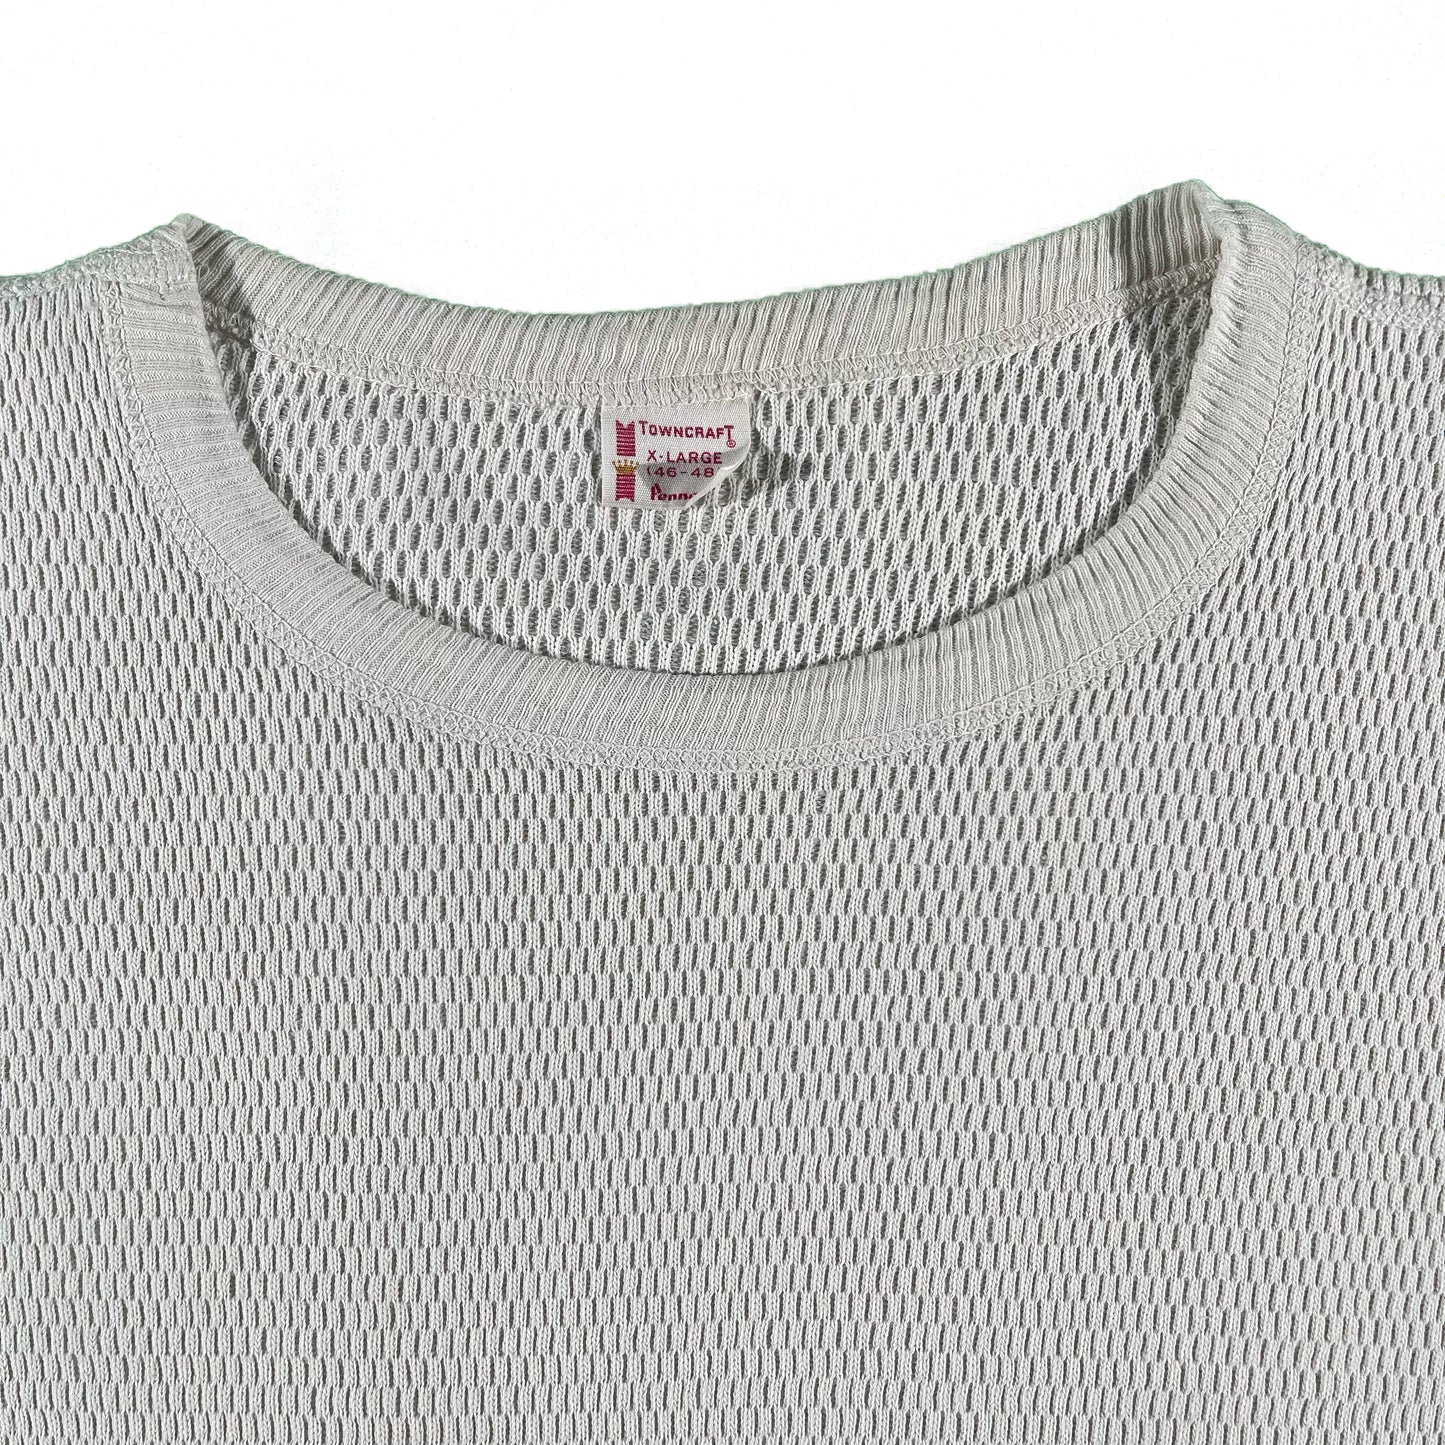 60s Penney's Towncraft Cotton Waffle Knit Thermal- M